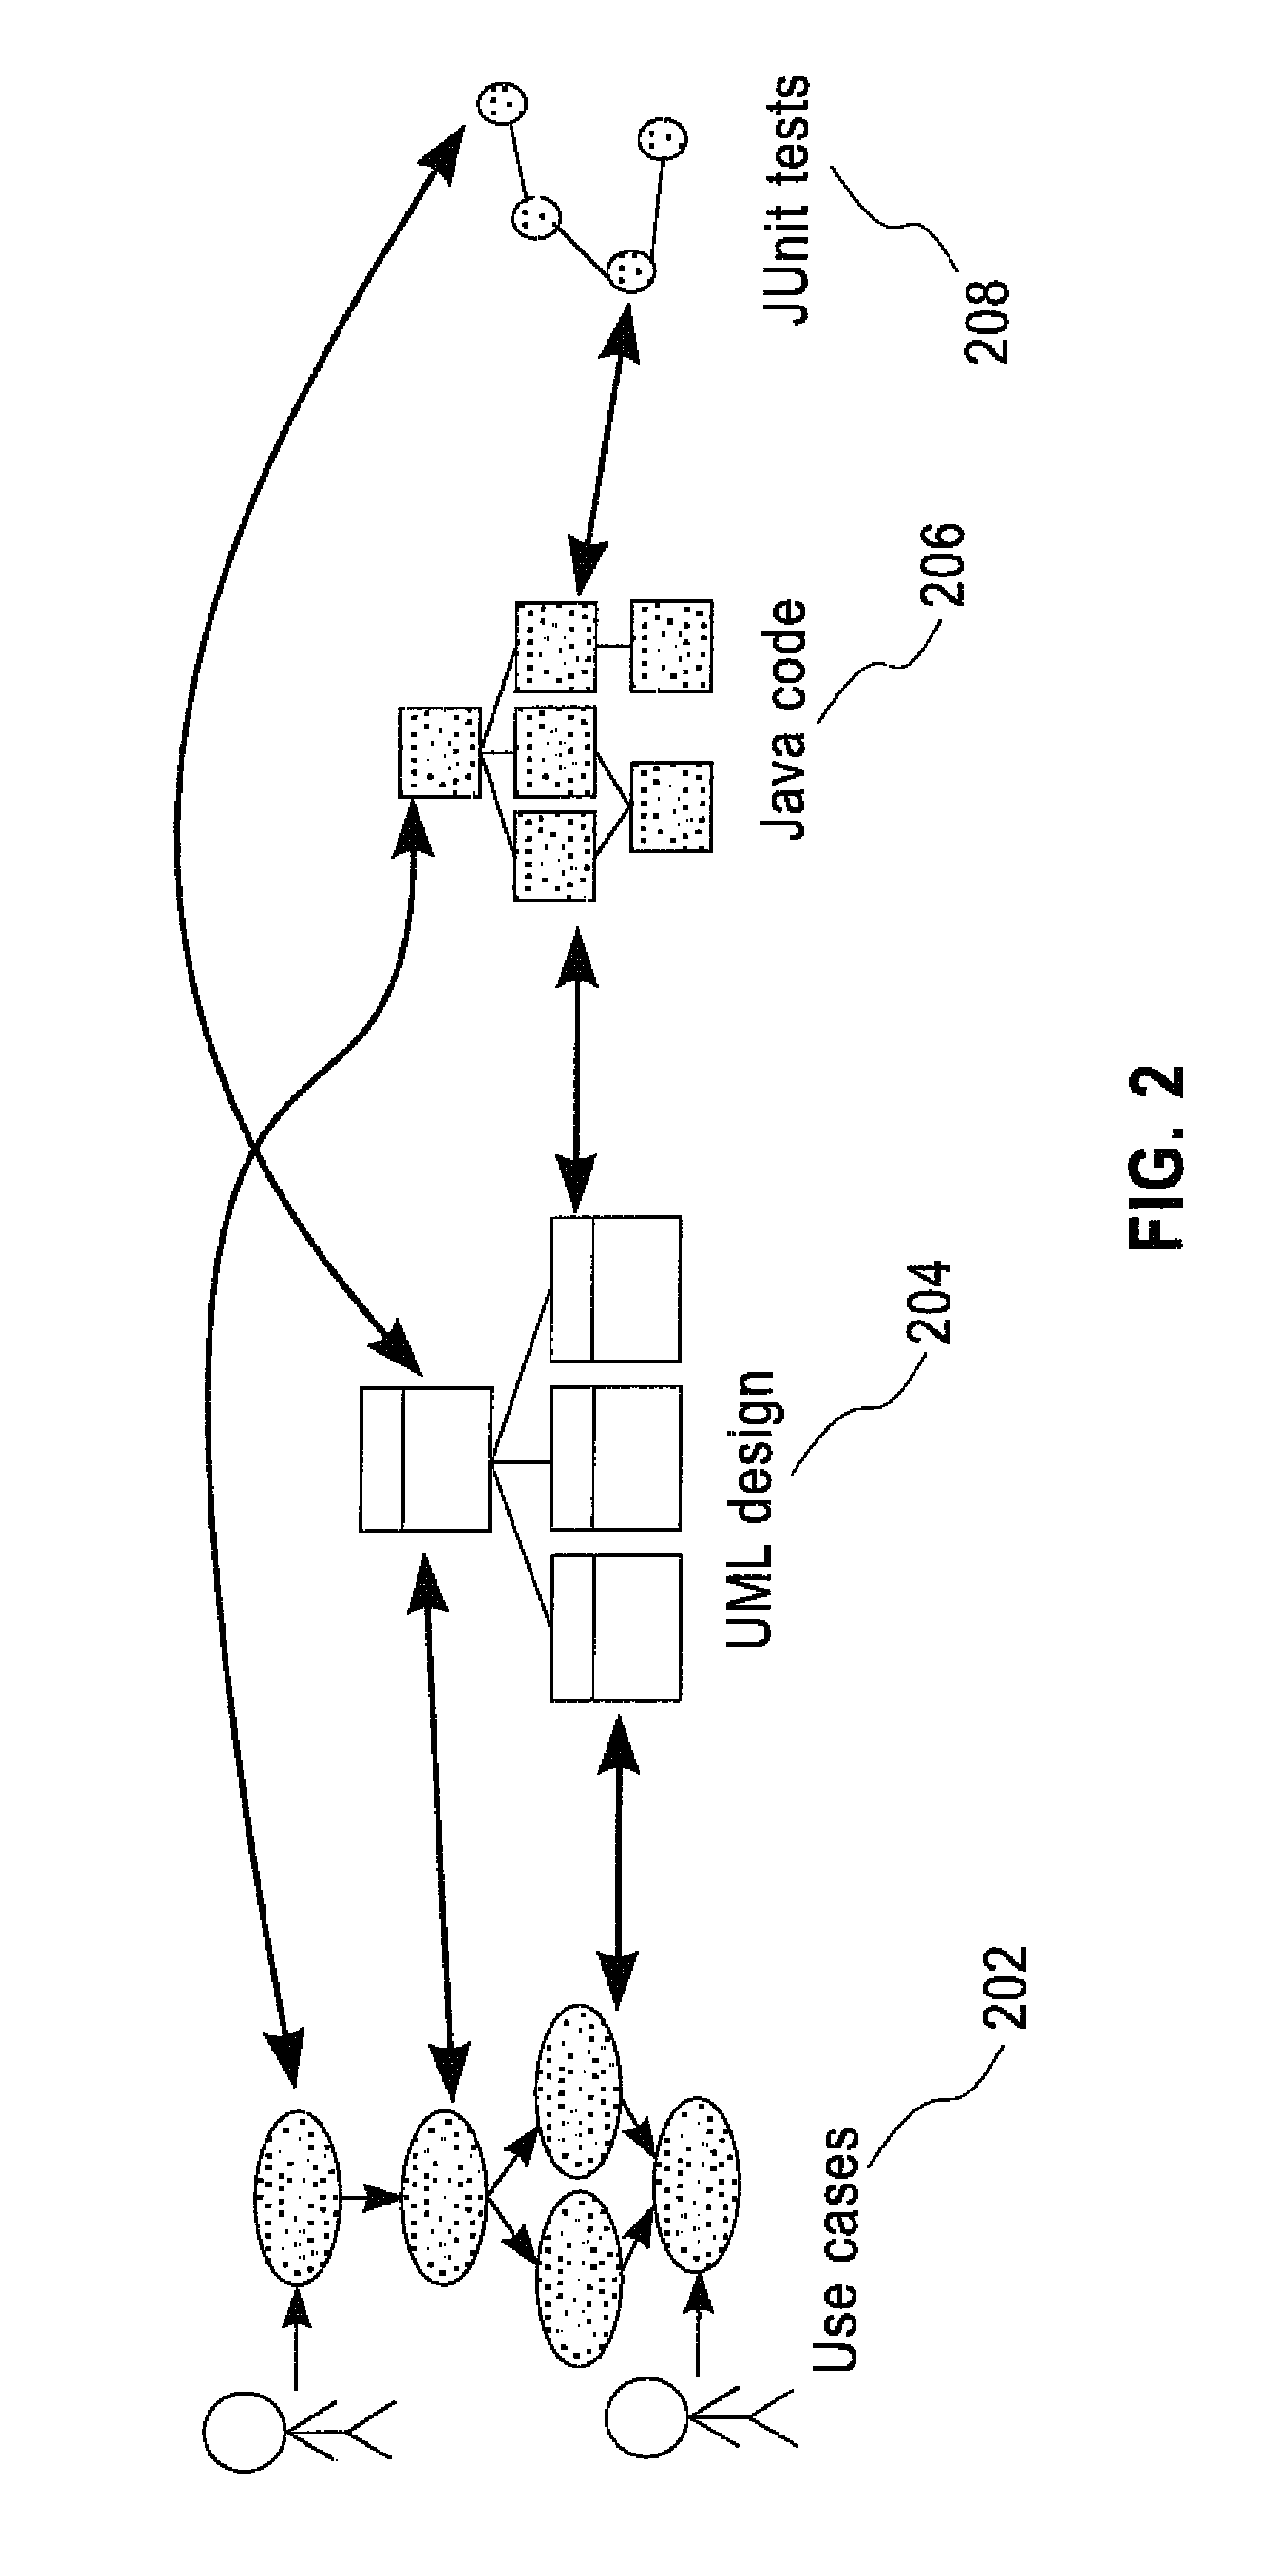 System and method for automatically determining relationships between software artifacts using multiple evidence sources